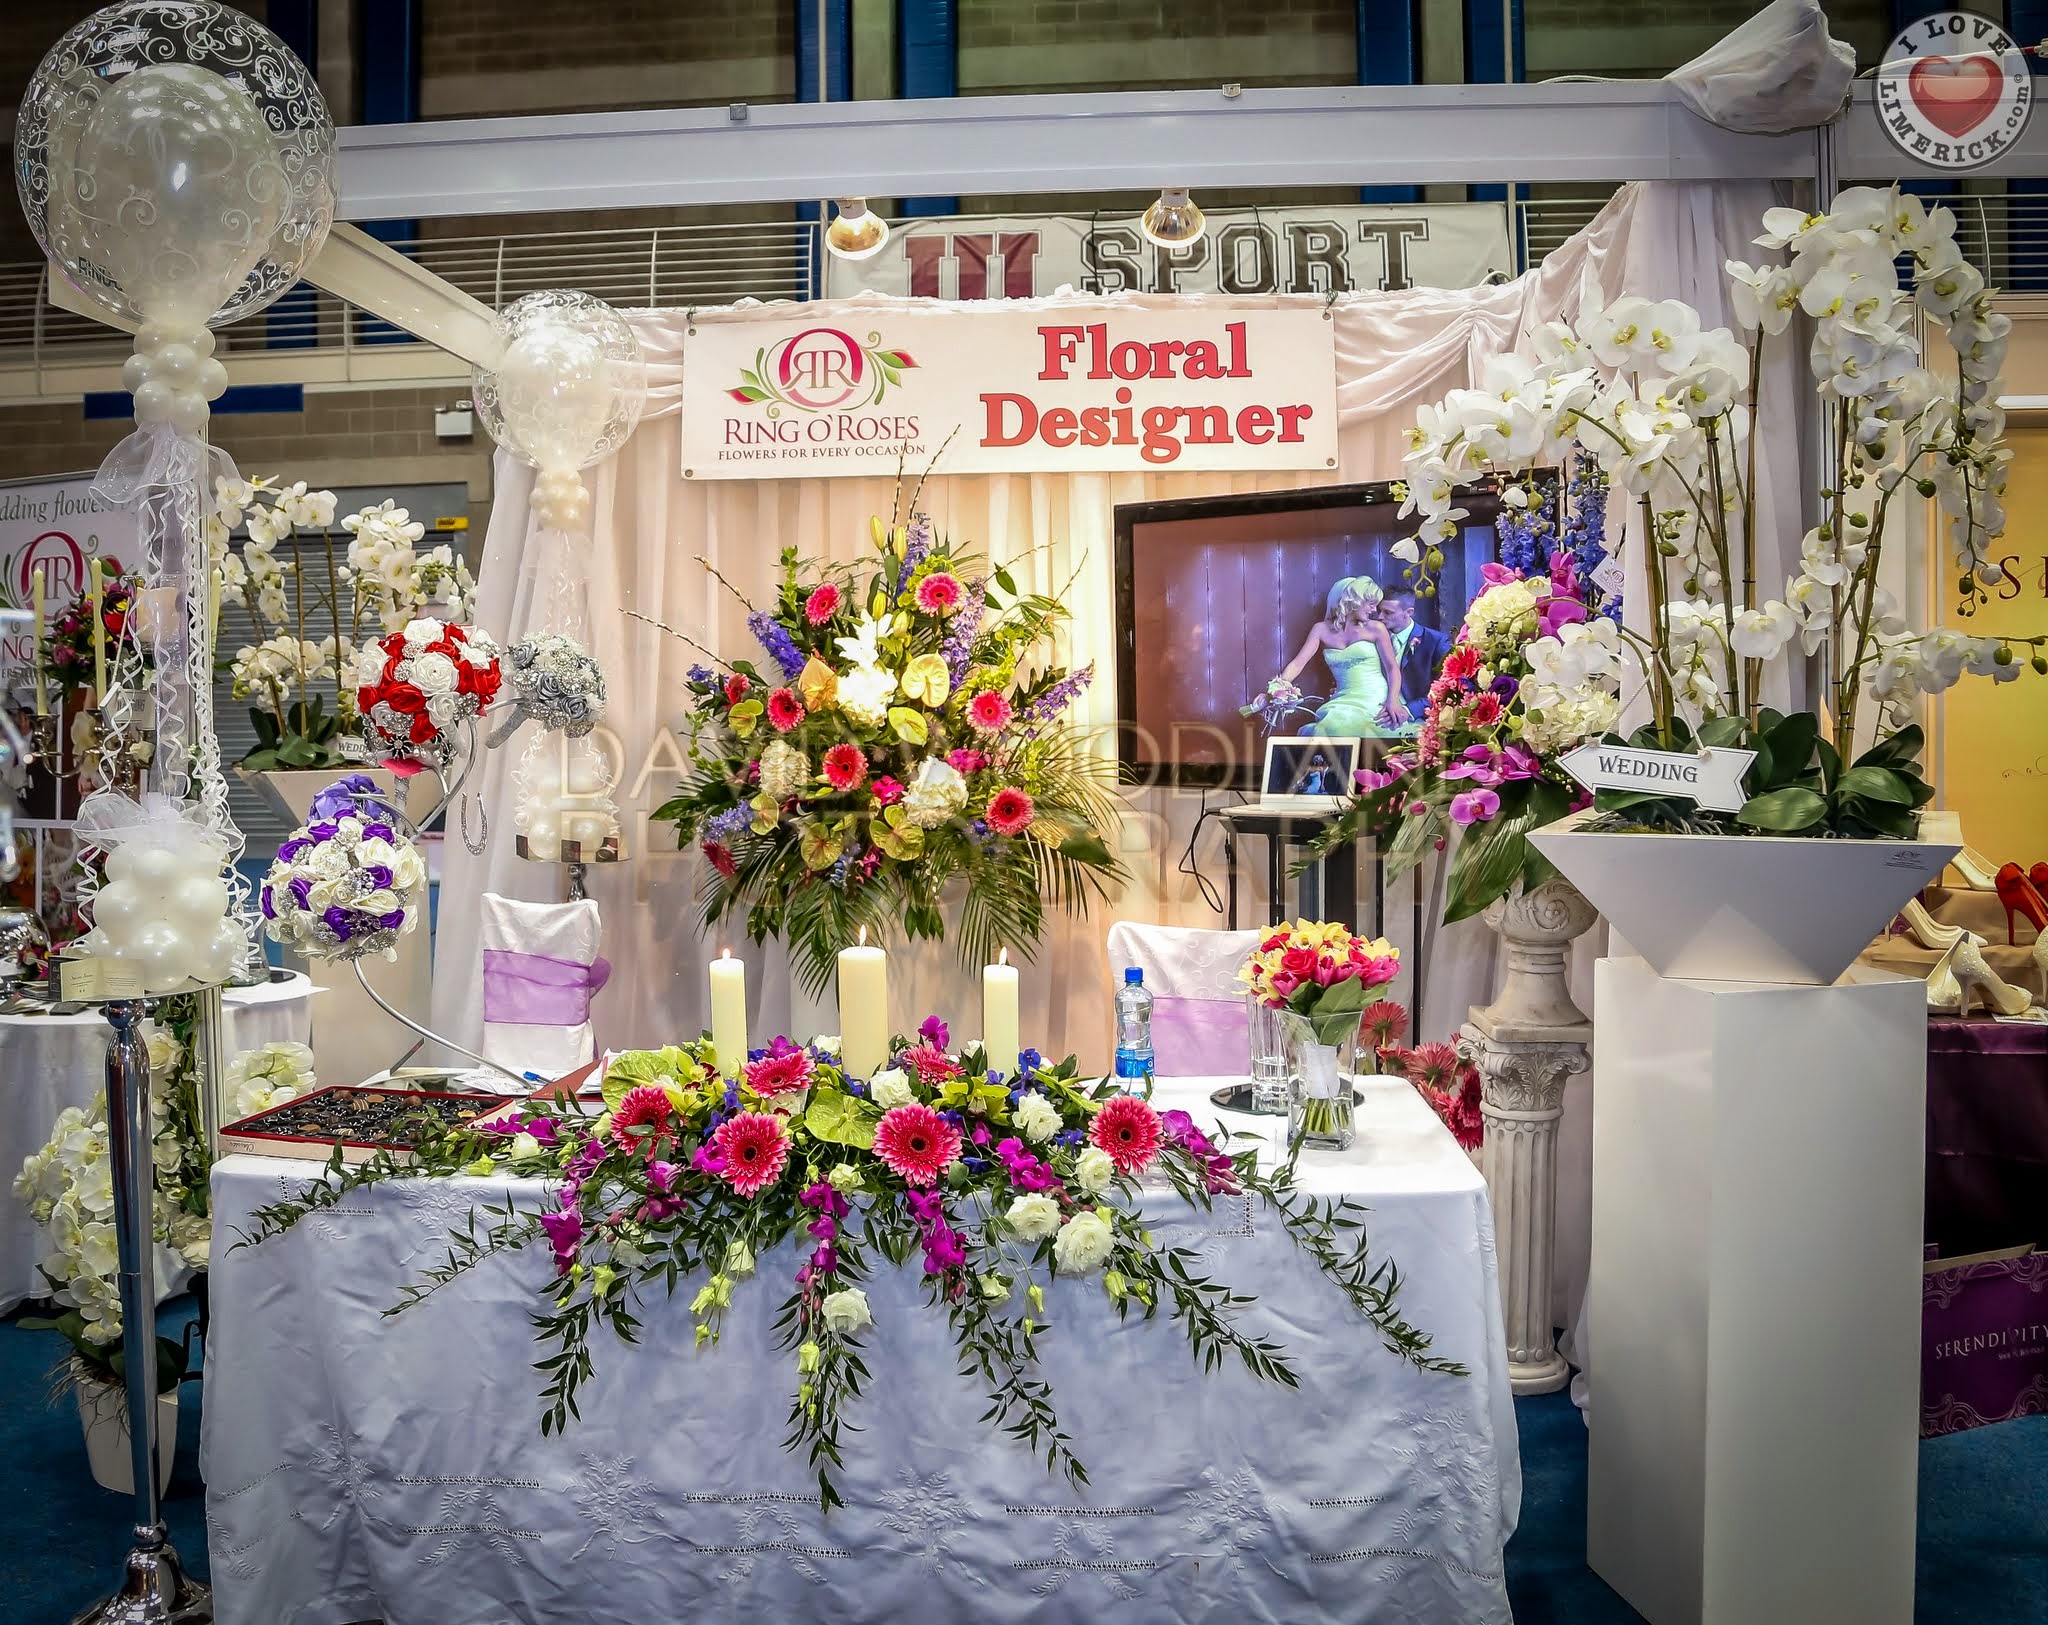 Mid-West-Bridal-Exhibition-2015.-Day-1.-DW-5